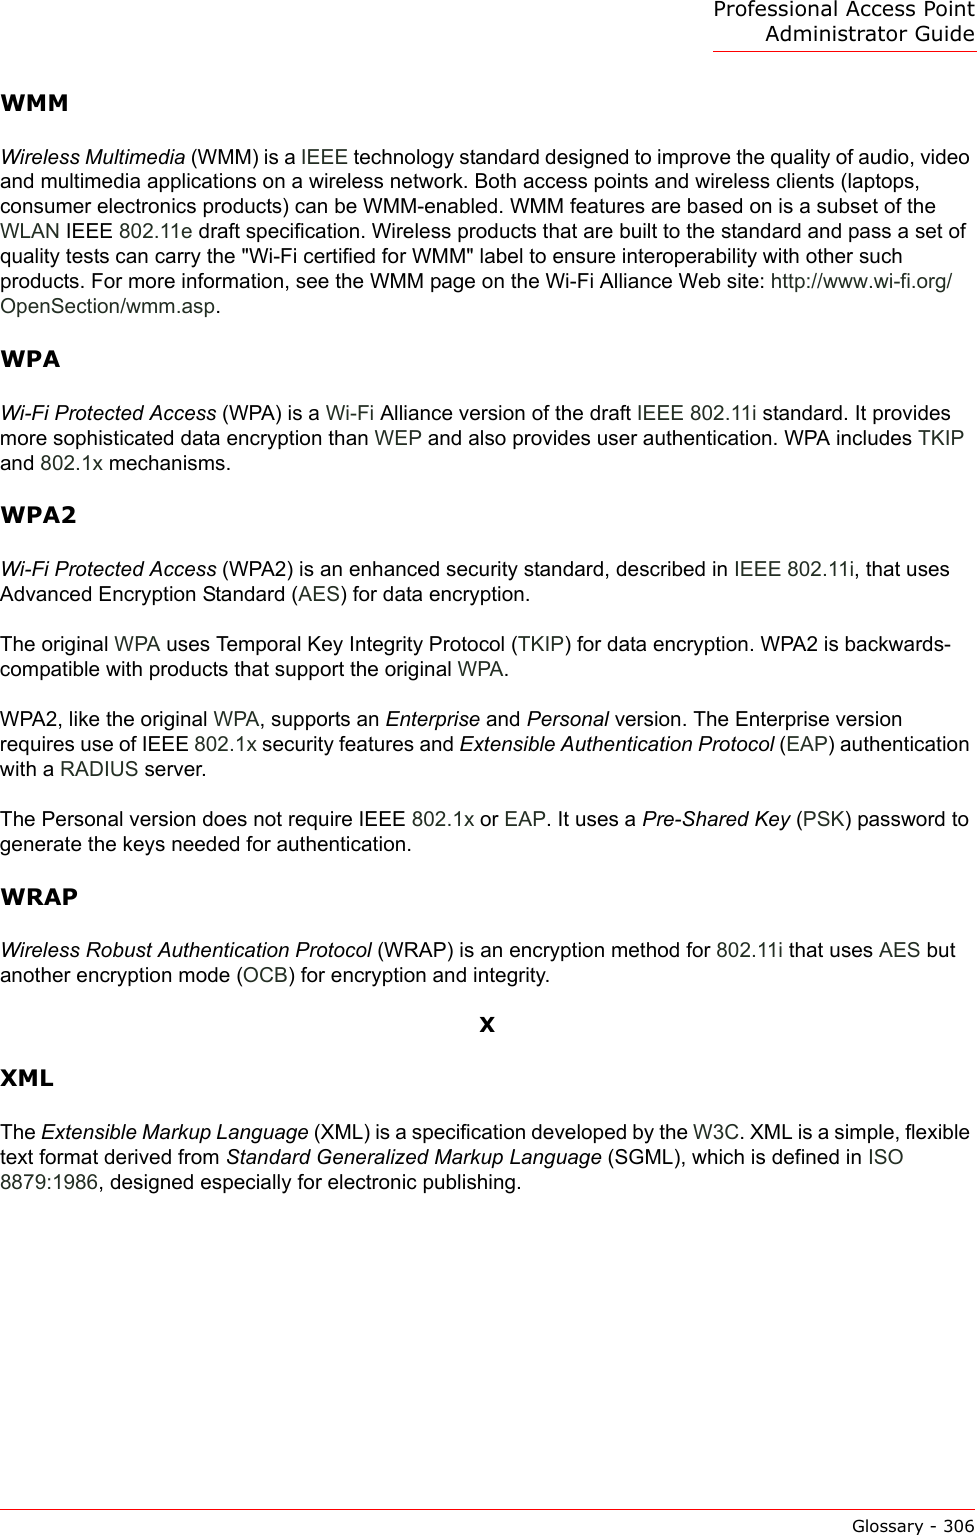 Professional Access Point Administrator GuideGlossary - 306WMMWireless Multimedia (WMM) is a IEEE technology standard designed to improve the quality of audio, video and multimedia applications on a wireless network. Both access points and wireless clients (laptops, consumer electronics products) can be WMM-enabled. WMM features are based on is a subset of the WLAN IEEE 802.11e draft specification. Wireless products that are built to the standard and pass a set of quality tests can carry the &quot;Wi-Fi certified for WMM&quot; label to ensure interoperability with other such products. For more information, see the WMM page on the Wi-Fi Alliance Web site: http://www.wi-fi.org/OpenSection/wmm.asp.WPAWi-Fi Protected Access (WPA) is a Wi-Fi Alliance version of the draft IEEE 802.11i standard. It provides more sophisticated data encryption than WEP and also provides user authentication. WPA includes TKIP and 802.1x mechanisms.WPA2Wi-Fi Protected Access (WPA2) is an enhanced security standard, described in IEEE 802.11i, that uses Advanced Encryption Standard (AES) for data encryption.The original WPA uses Temporal Key Integrity Protocol (TKIP) for data encryption. WPA2 is backwards-compatible with products that support the original WPA.WPA2, like the original WPA, supports an Enterprise and Personal version. The Enterprise version requires use of IEEE 802.1x security features and Extensible Authentication Protocol (EAP) authentication with a RADIUS server.The Personal version does not require IEEE 802.1x or EAP. It uses a Pre-Shared Key (PSK) password to generate the keys needed for authentication.WRAPWireless Robust Authentication Protocol (WRAP) is an encryption method for 802.11i that uses AES but another encryption mode (OCB) for encryption and integrity.XXMLThe Extensible Markup Language (XML) is a specification developed by the W3C. XML is a simple, flexible text format derived from Standard Generalized Markup Language (SGML), which is defined in ISO 8879:1986, designed especially for electronic publishing.